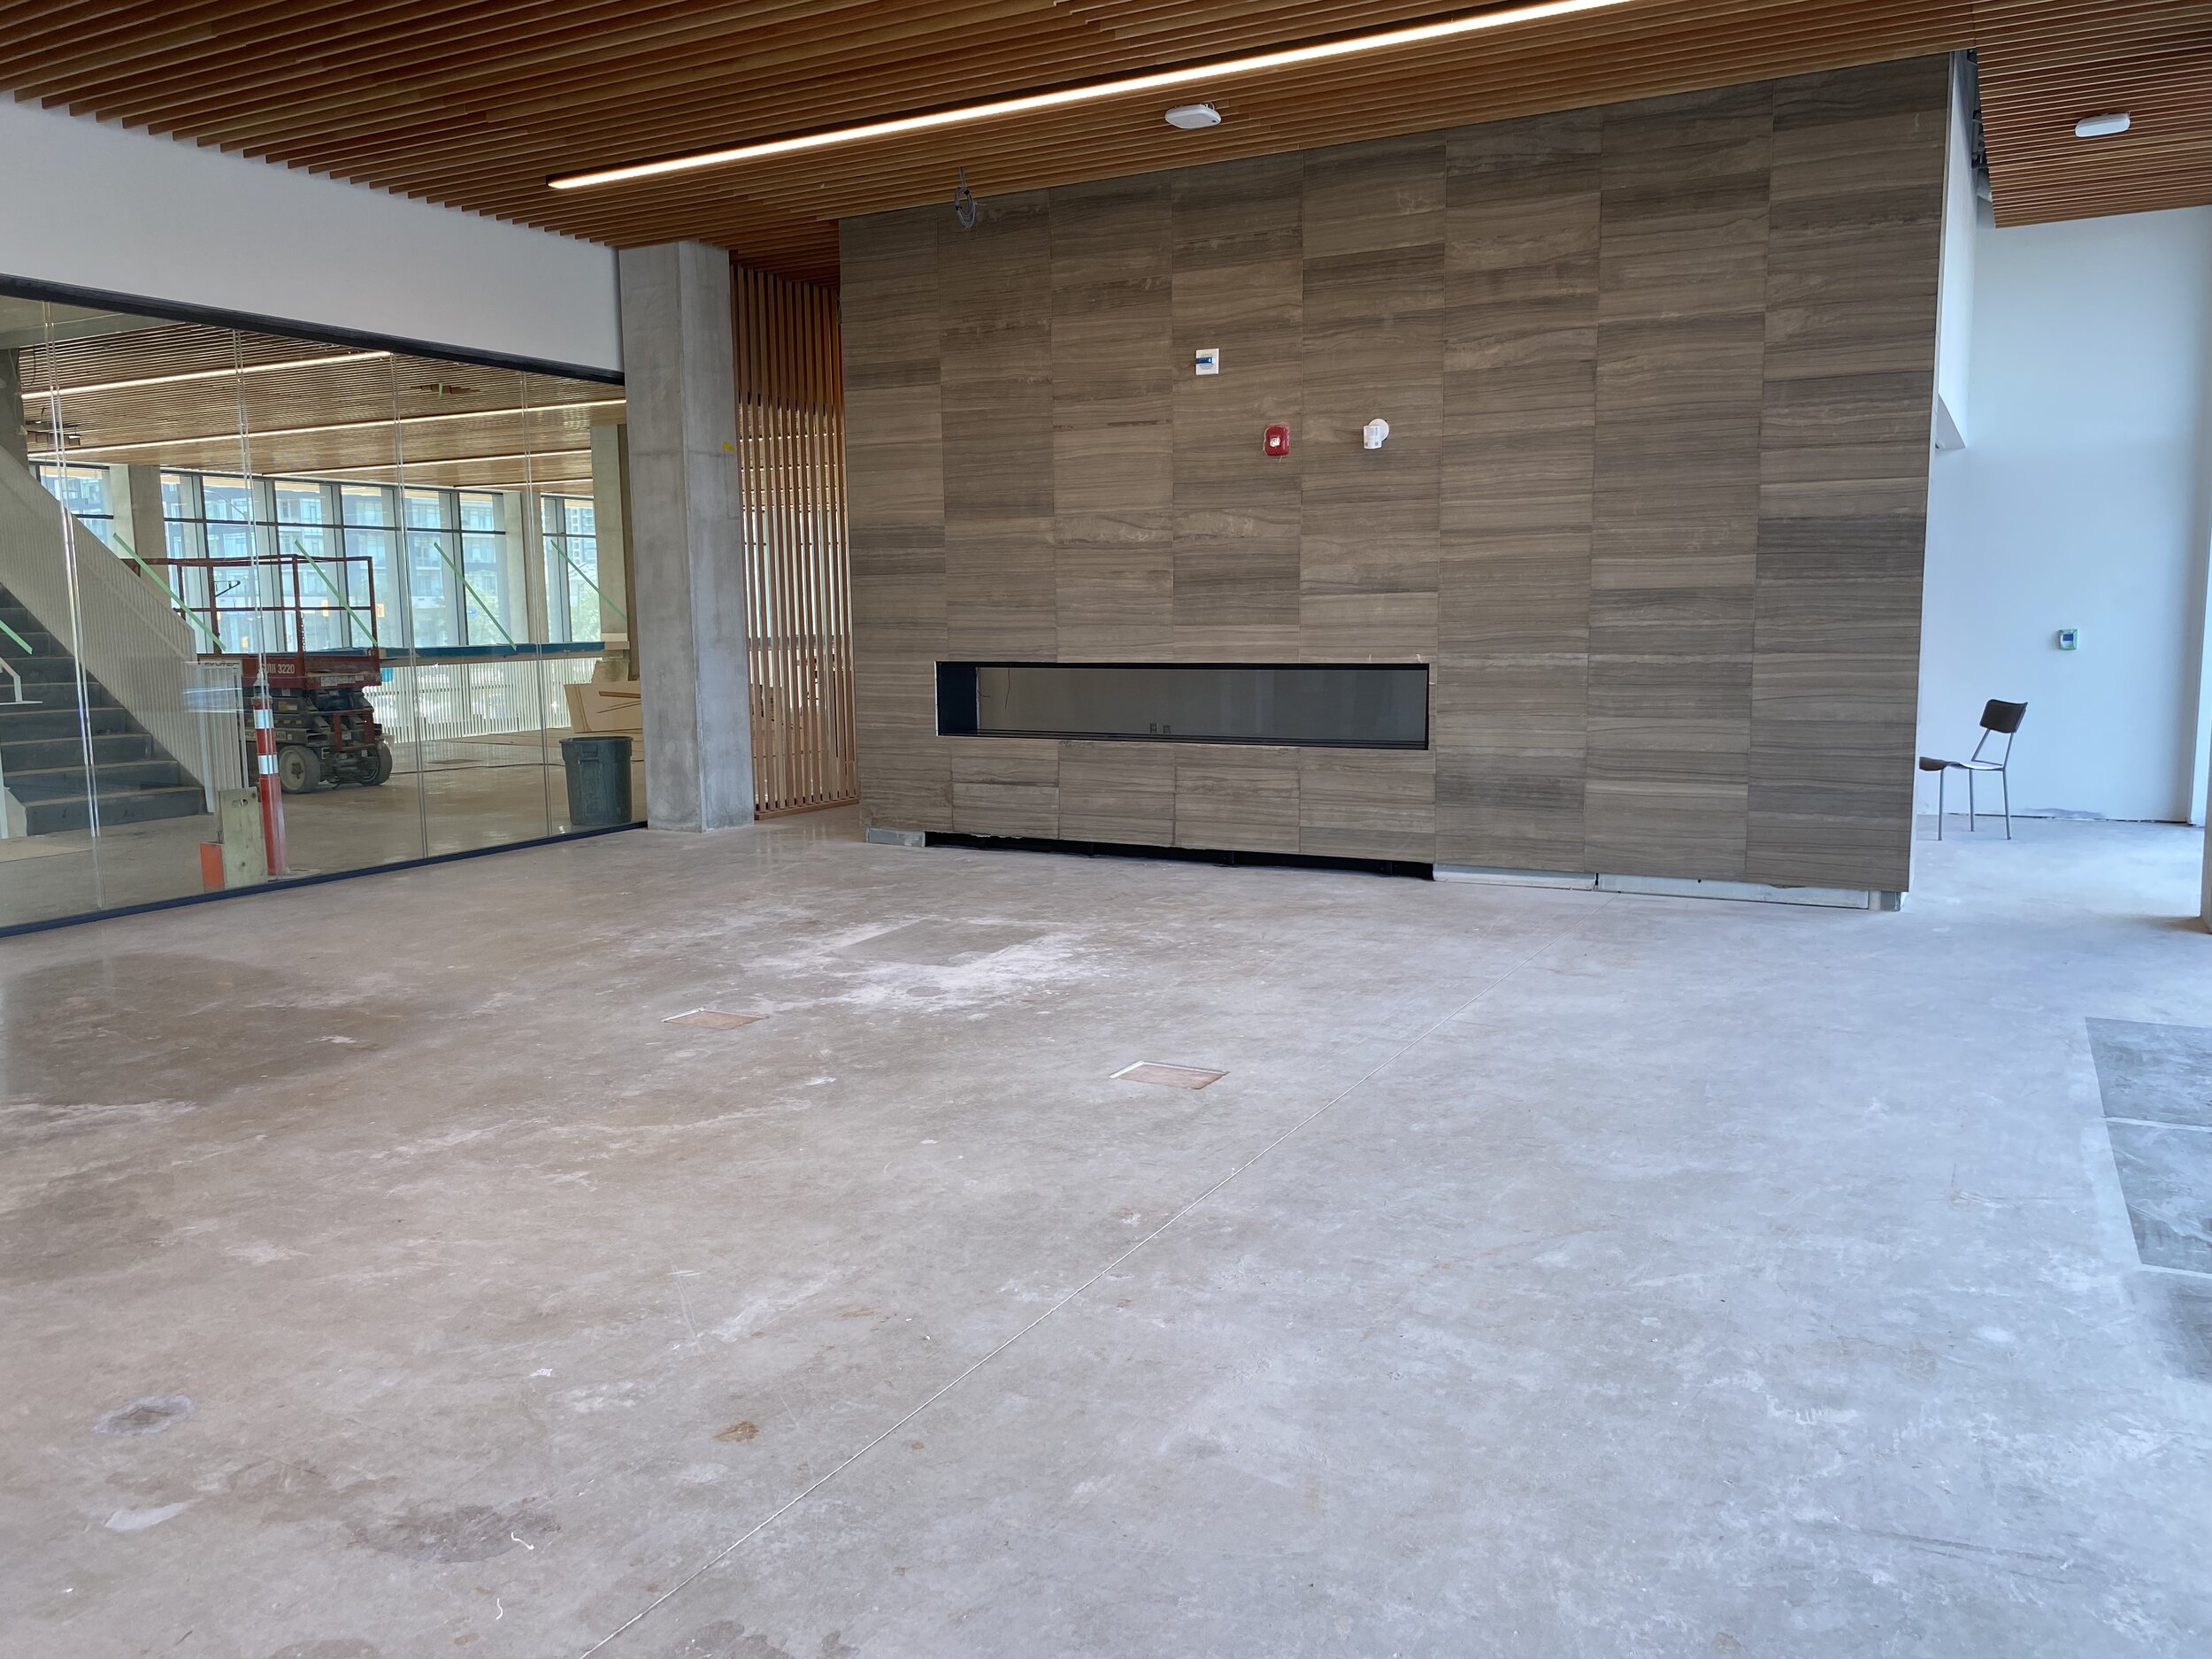  Level 2 of  Hazel McCallion Campus Student Centre and Athletic Building. features a quiet room with a fireplace.  